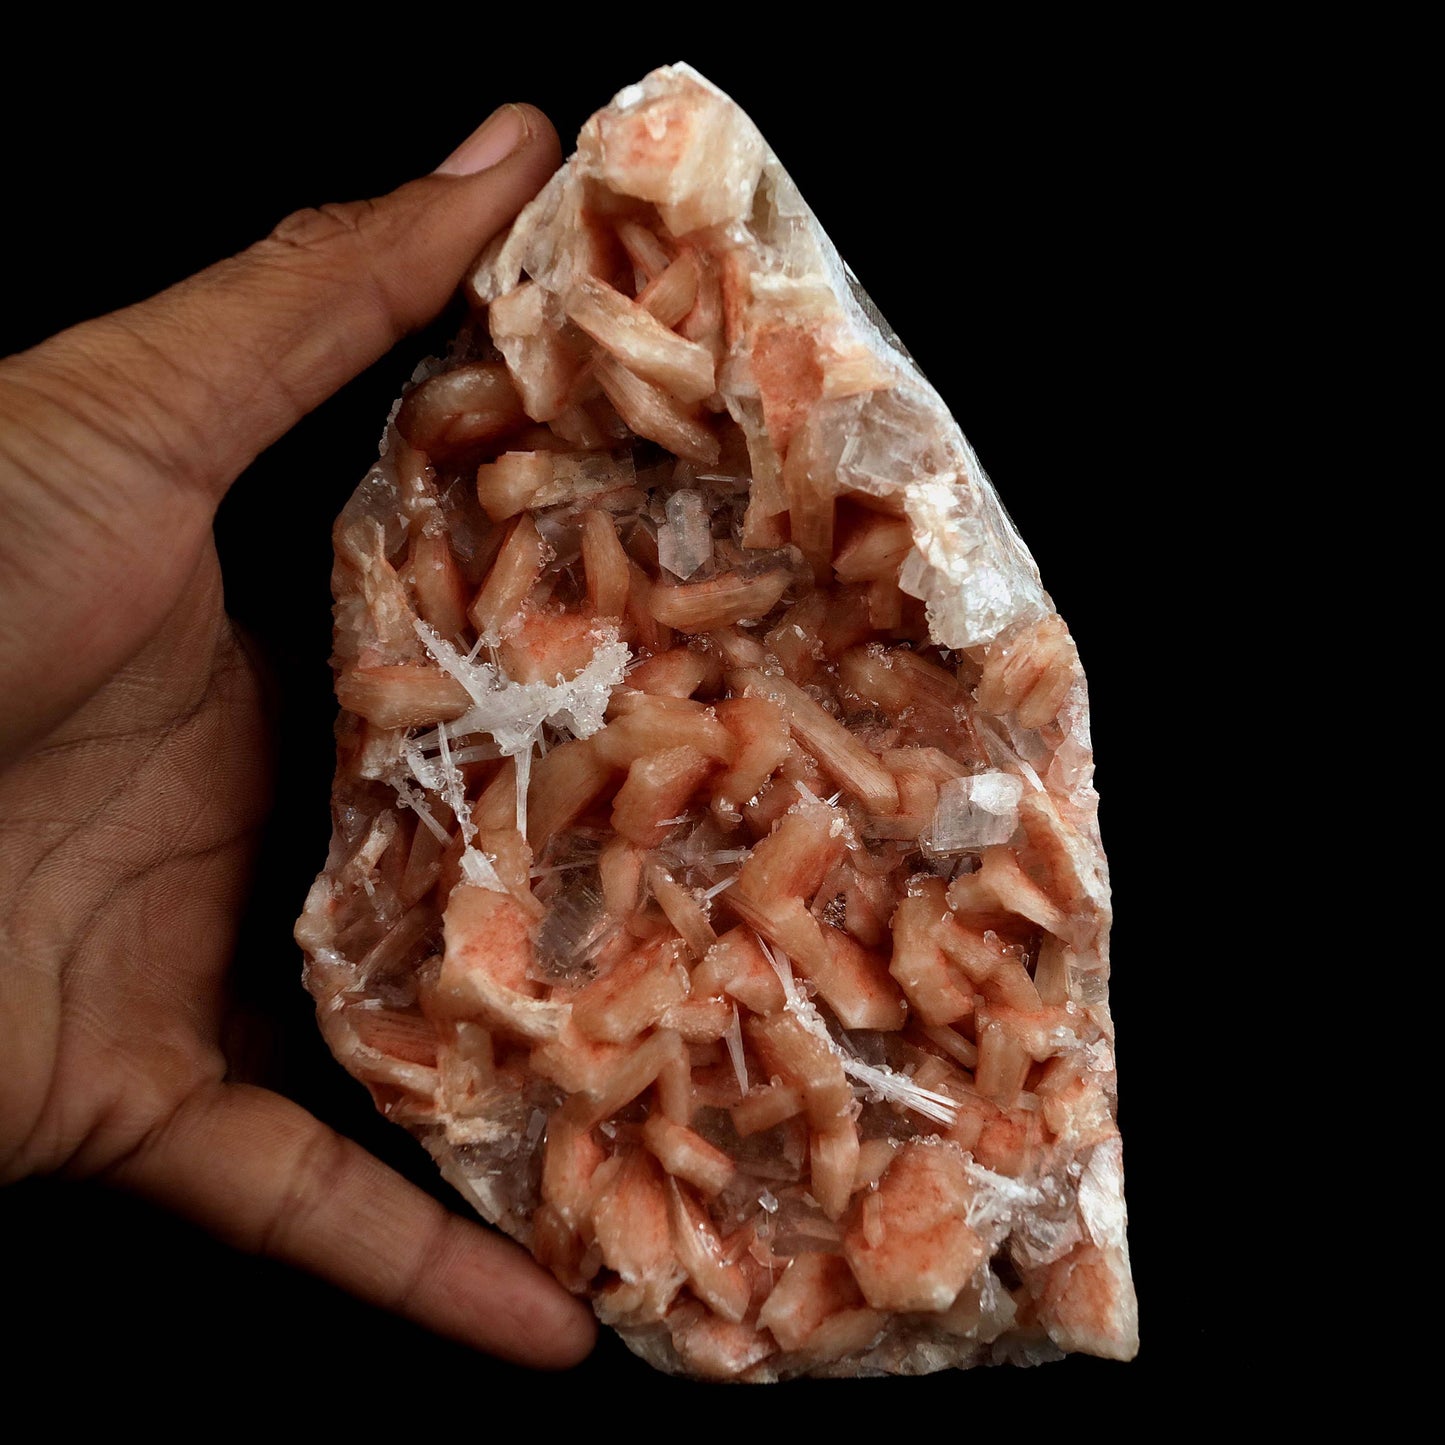 Apophyllite with Red Stilbite, Scolecite Natural Mineral Specimen # B…  https://www.superbminerals.us/products/apophyllite-with-red-stilbite-scolecite-natural-mineral-specimen-b-4577  Features:Green Apophyllite tabular crystals with pink stilbite mixed small scolecite sprays triangular in shape specimen.Primary Mineral(s): ApophylliteSecondary Mineral(s): Stilbite, Scolecite